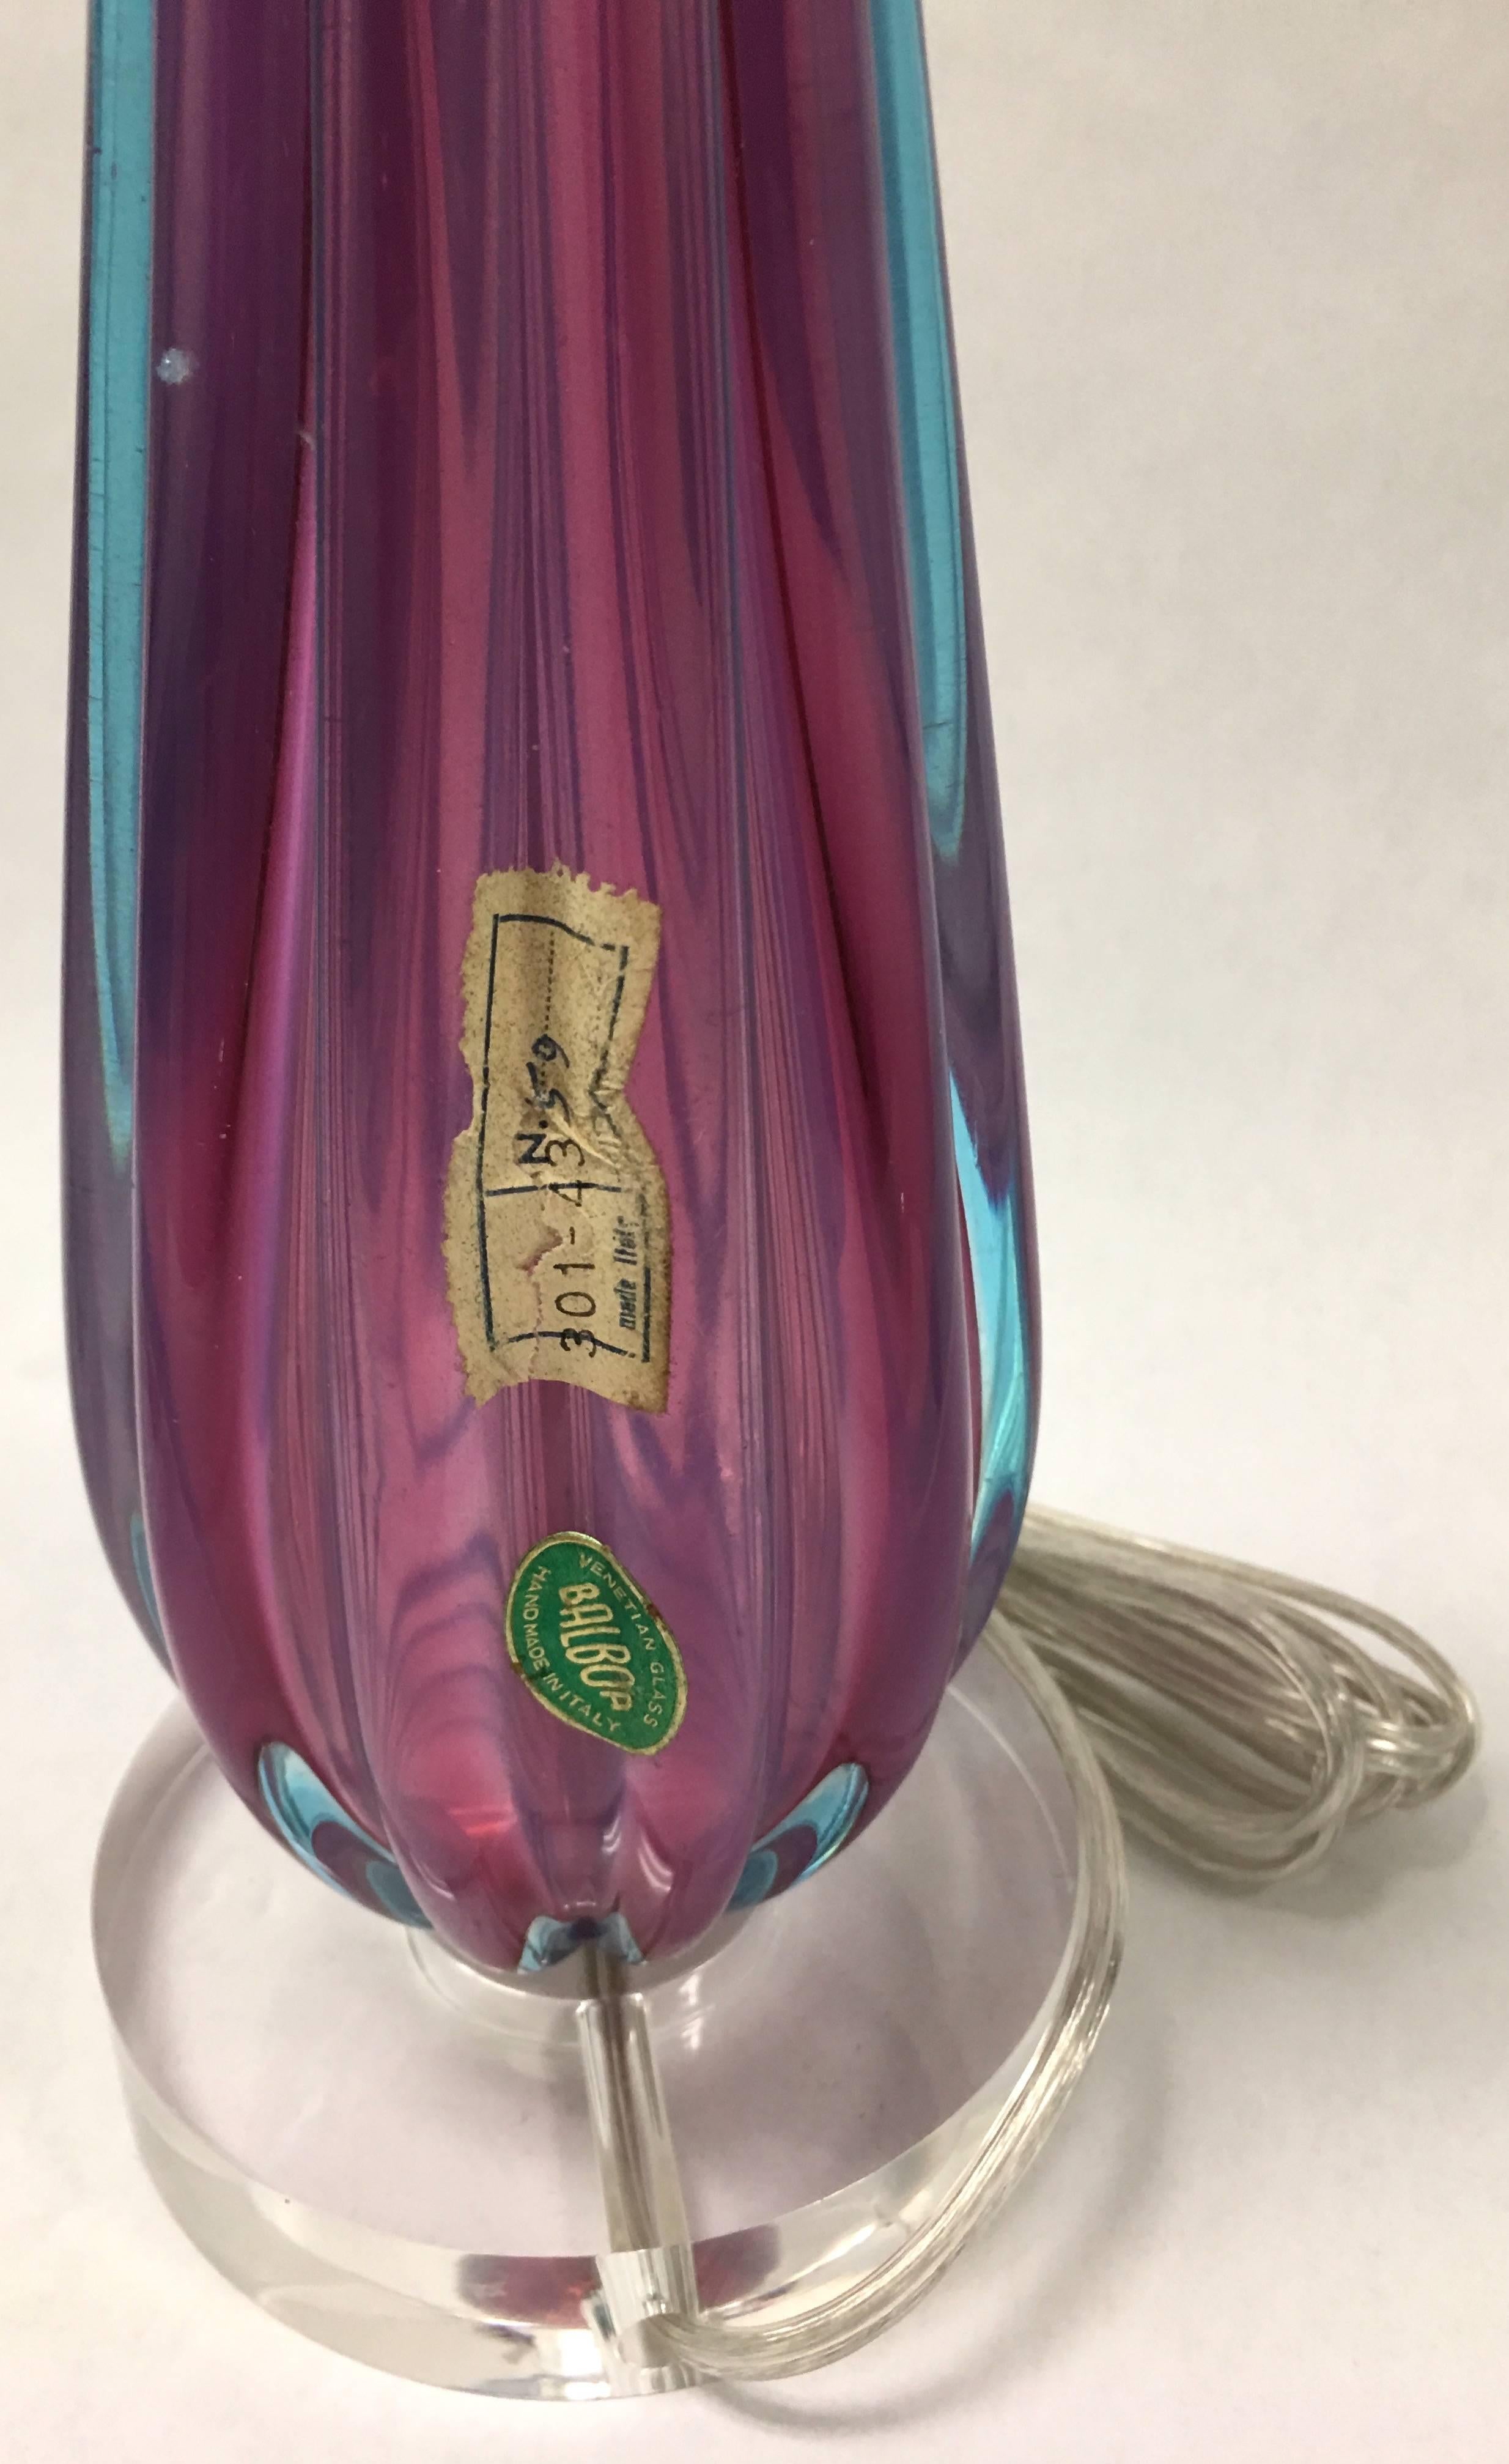 Pink and Blue Murano Glass Table Lamp In Good Condition For Sale In Stamford, CT